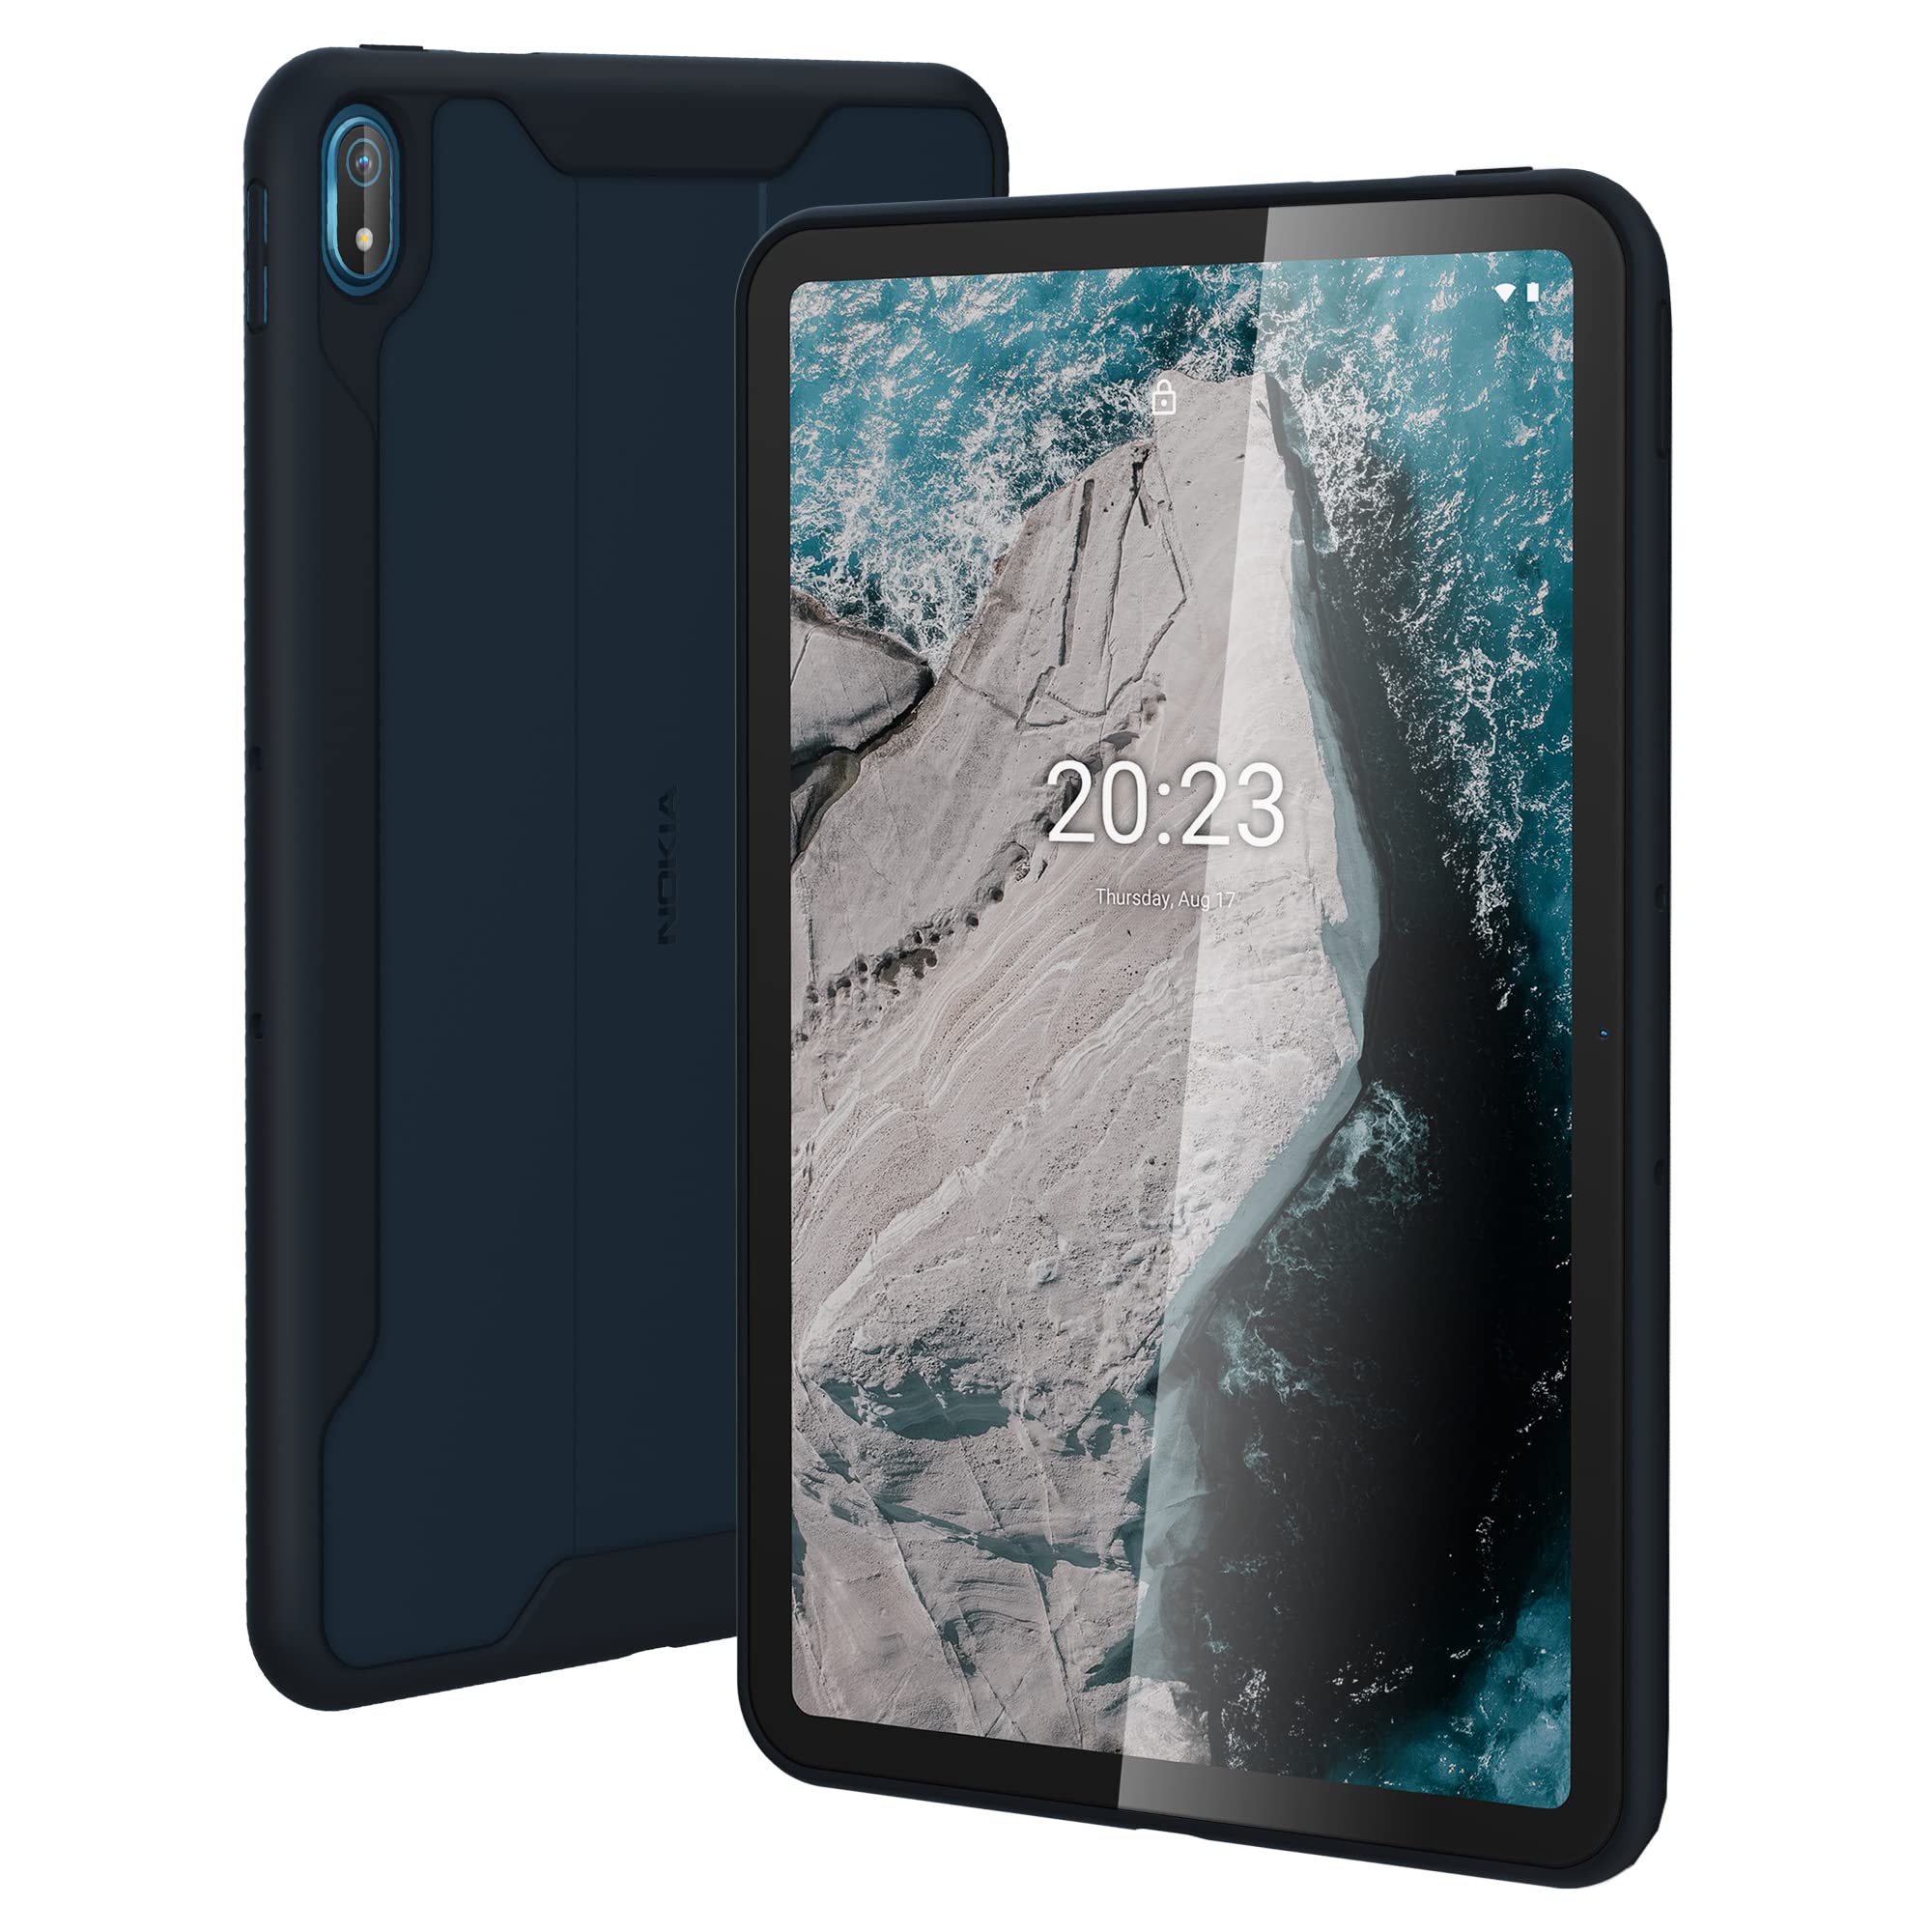 Nokia T20 + Rugged Flip Cover $135 shipped (new customers)